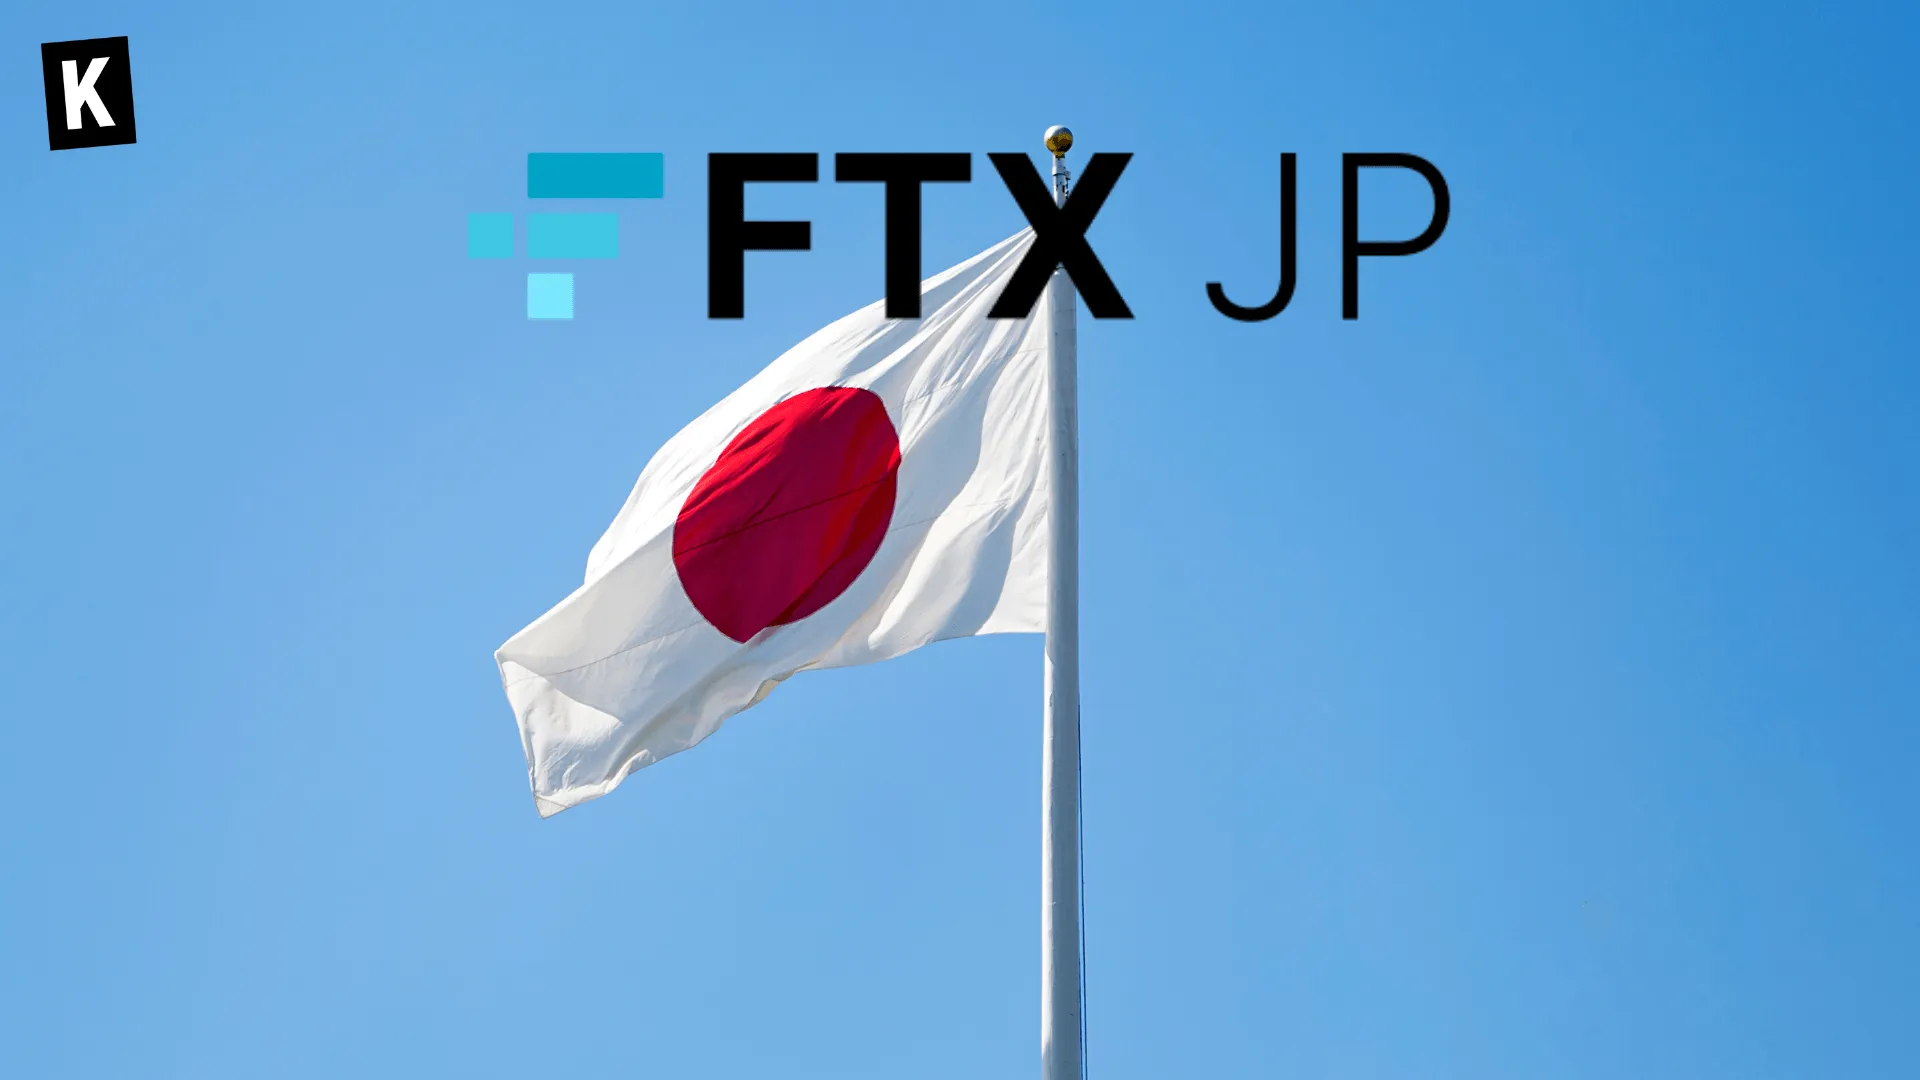 FTX JP logo with a Japanese flag flapping in the wind